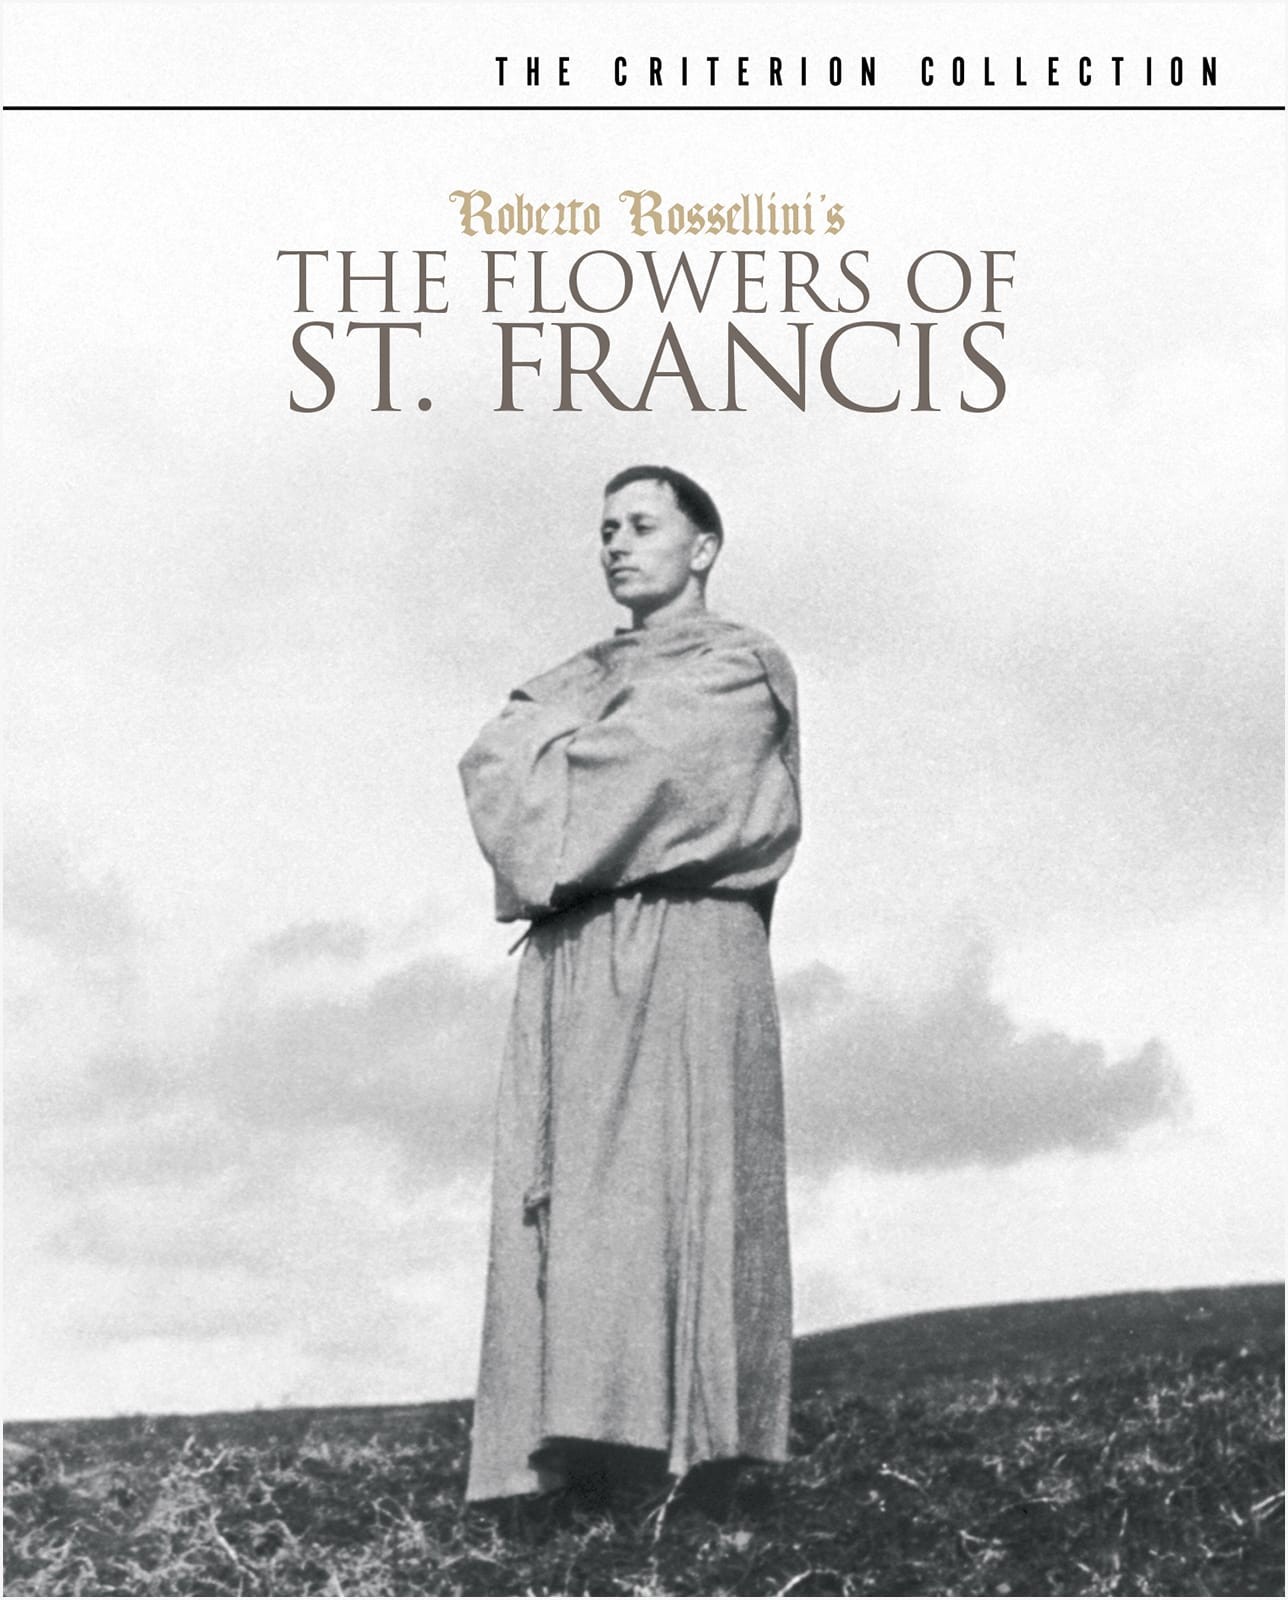 "The Flowers of St. Francis" (1950)